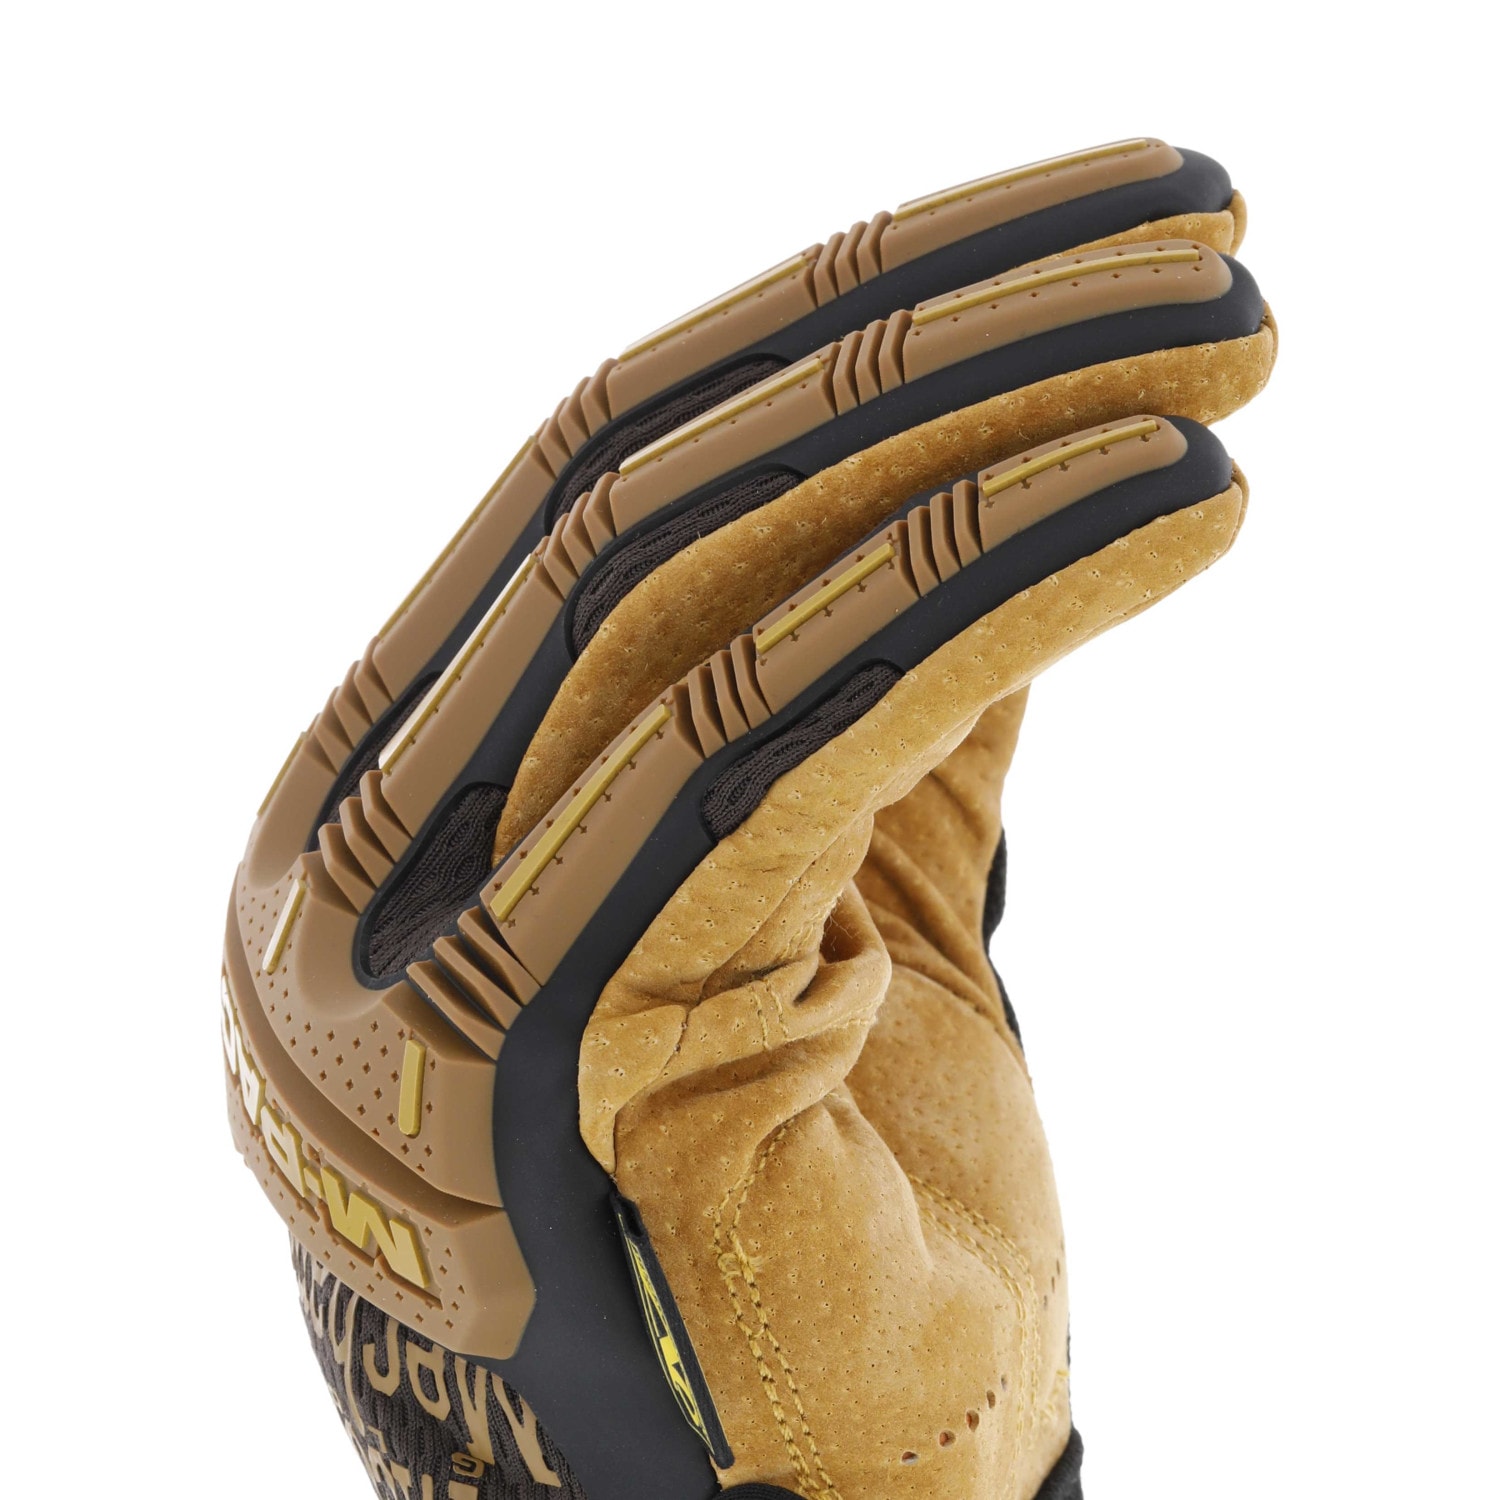 MECHANIX WEAR Large Brown Synthetic Leather Gloves, (1-Pair) in